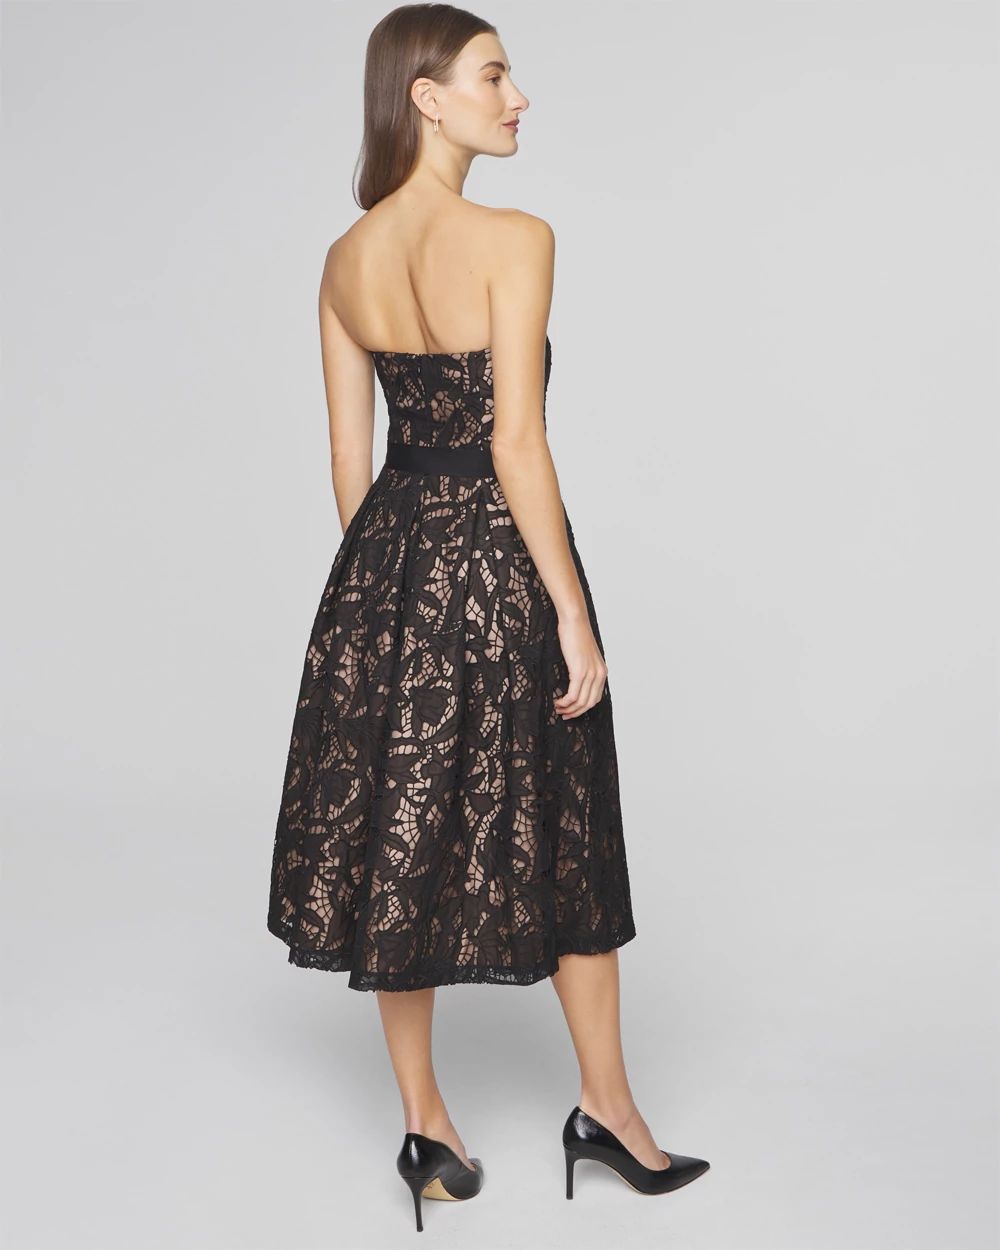 Petite Strapless Lace Fit & Flare Midi Dress click to view larger image.